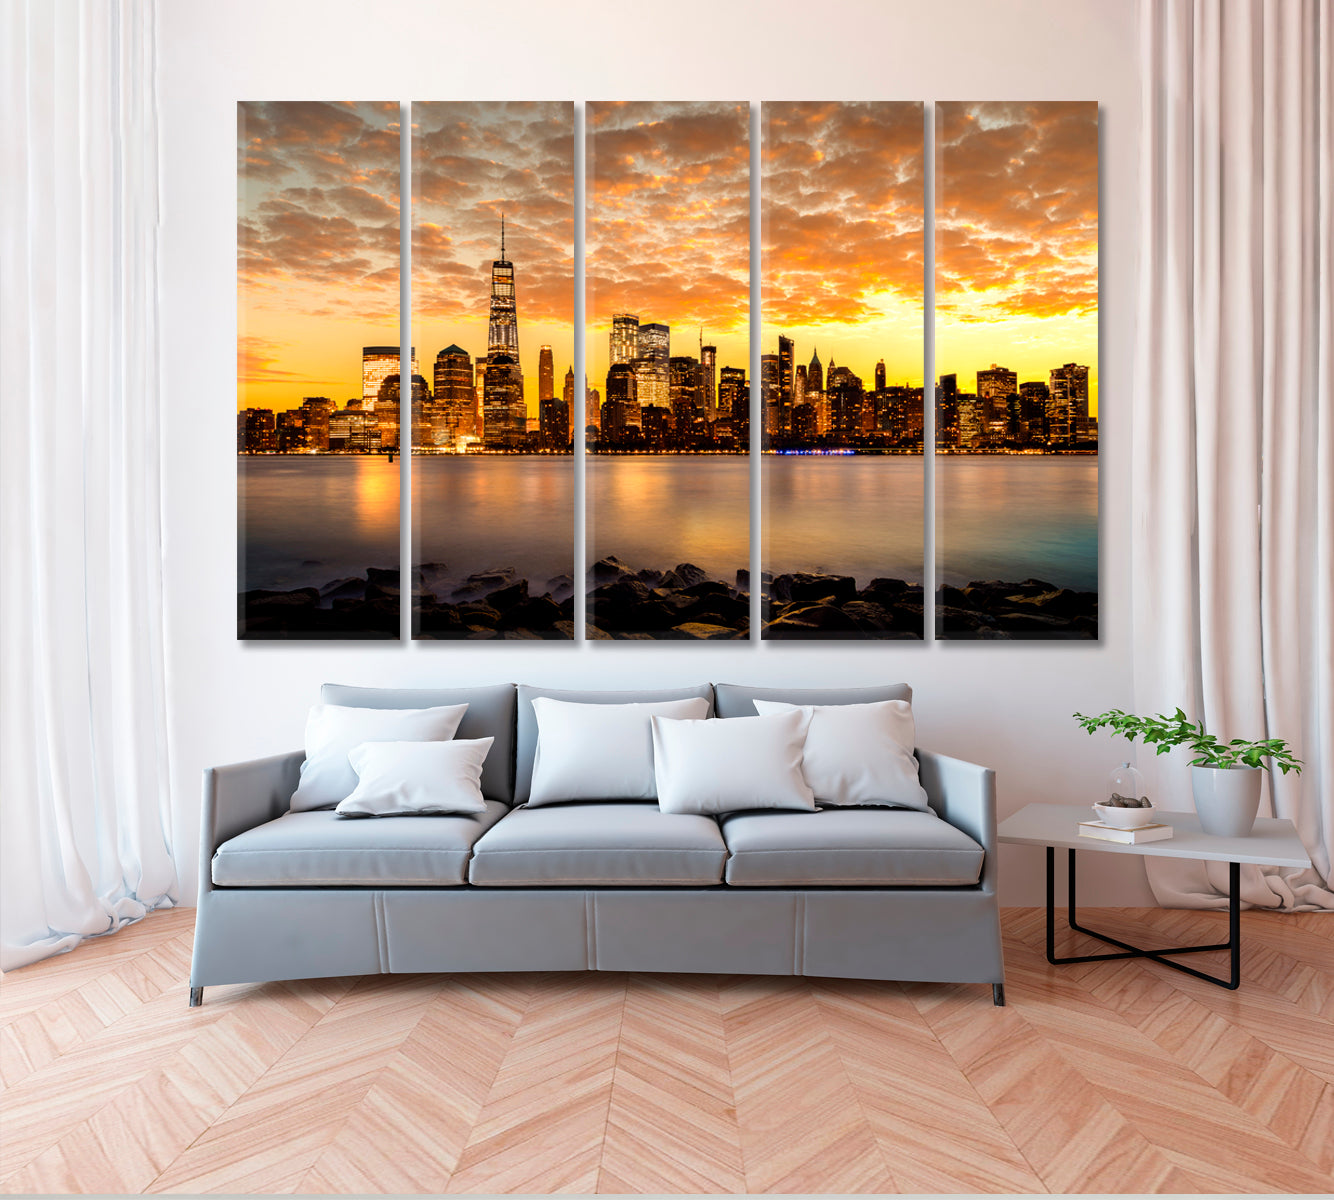 New York Cityscape at Sunset Canvas Print ArtLexy 5 Panels 36"x24" inches 